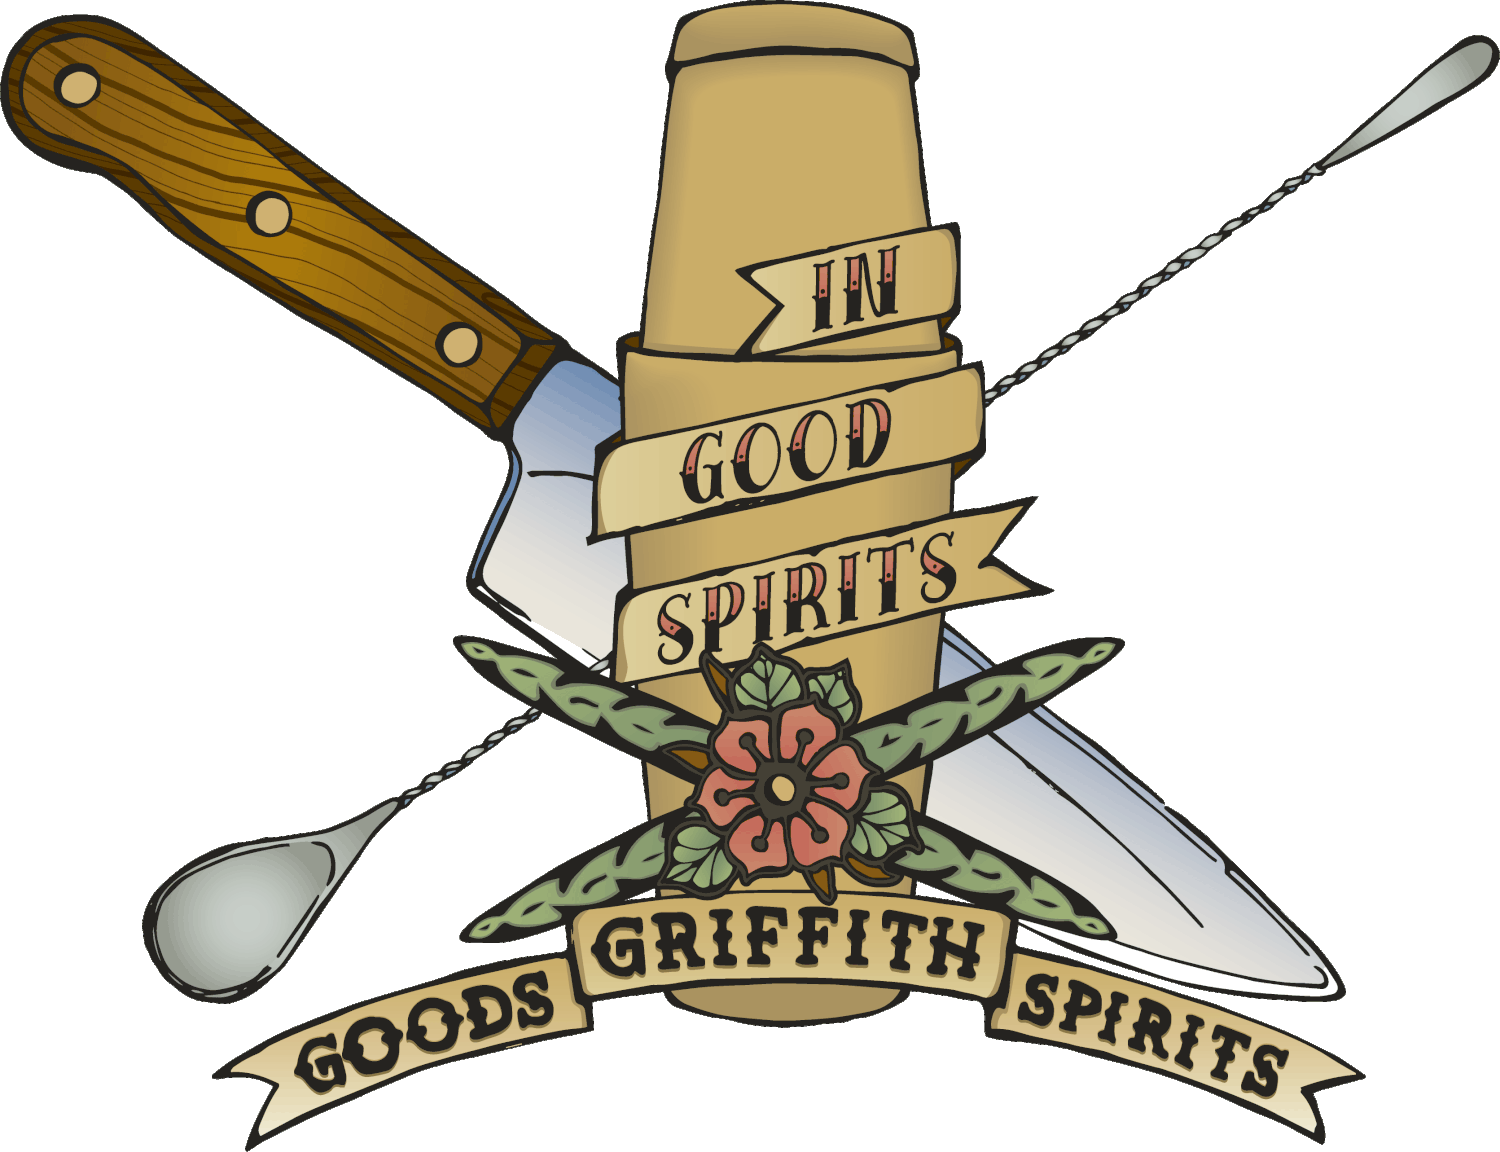 Griffith Goods and Spirits